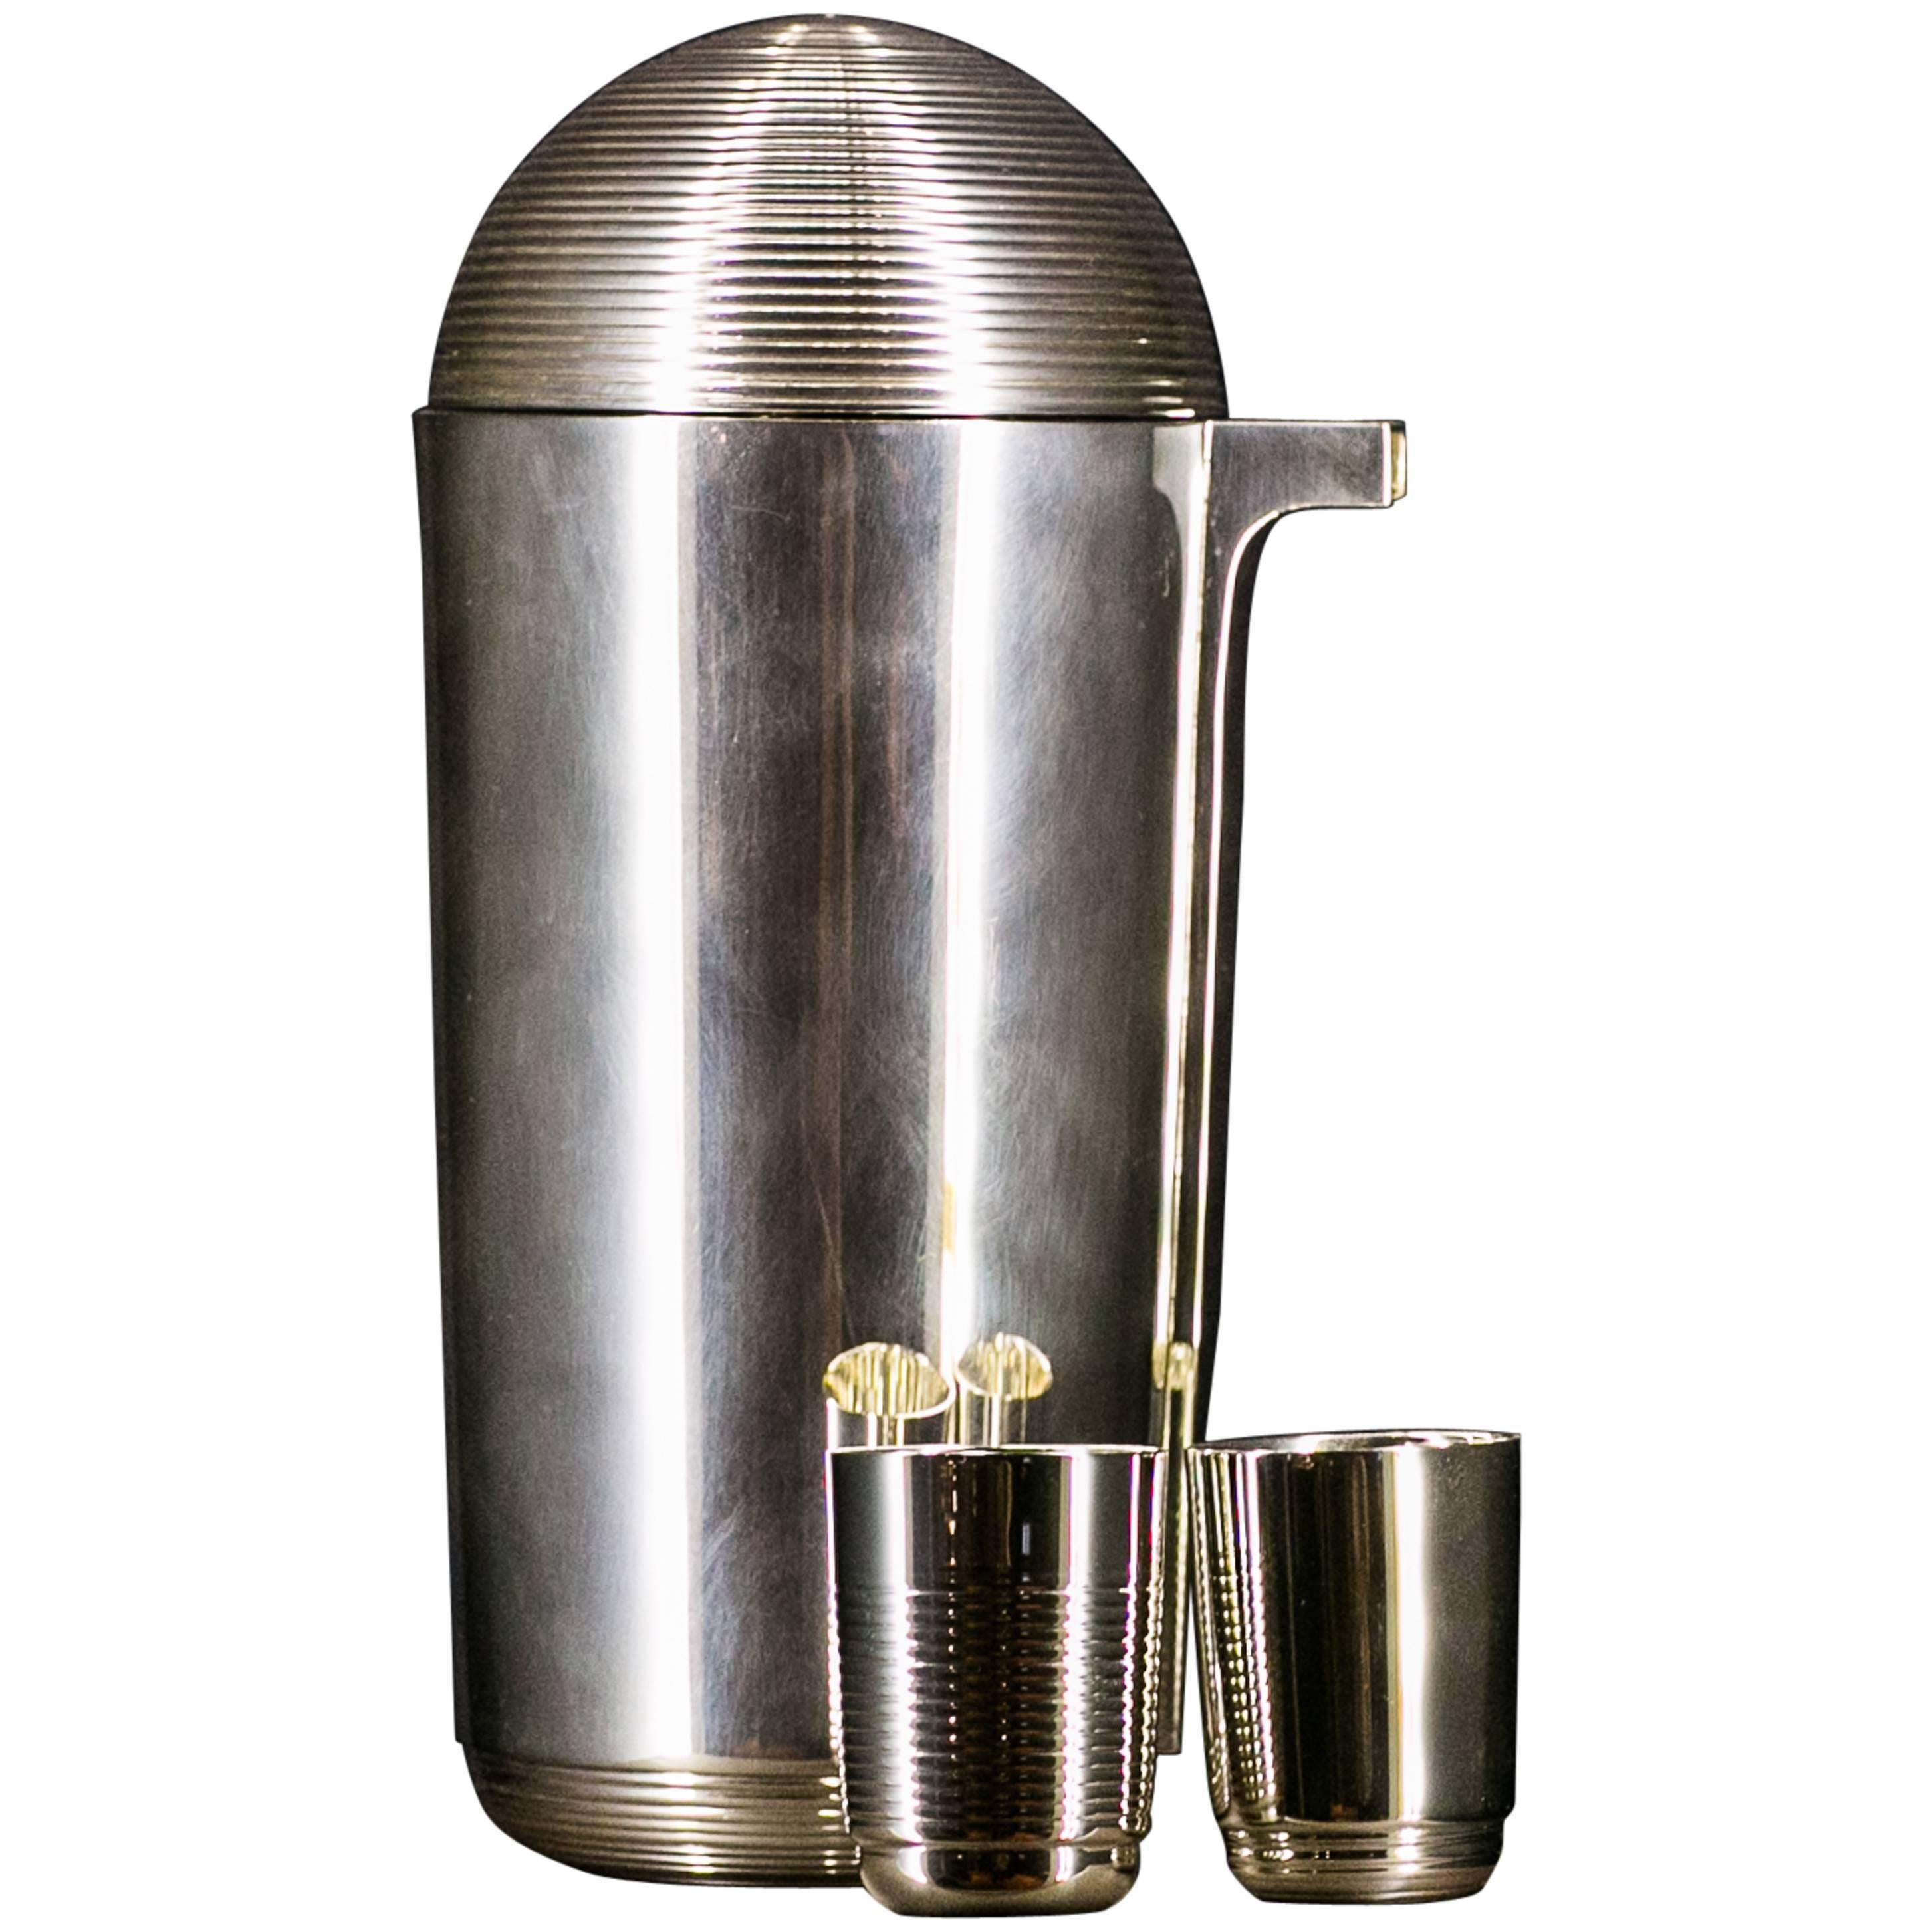 Jean Puiforcat 1935 Filleted Silver Shaker and Shots Art Deco Silversmith Ed For Sale